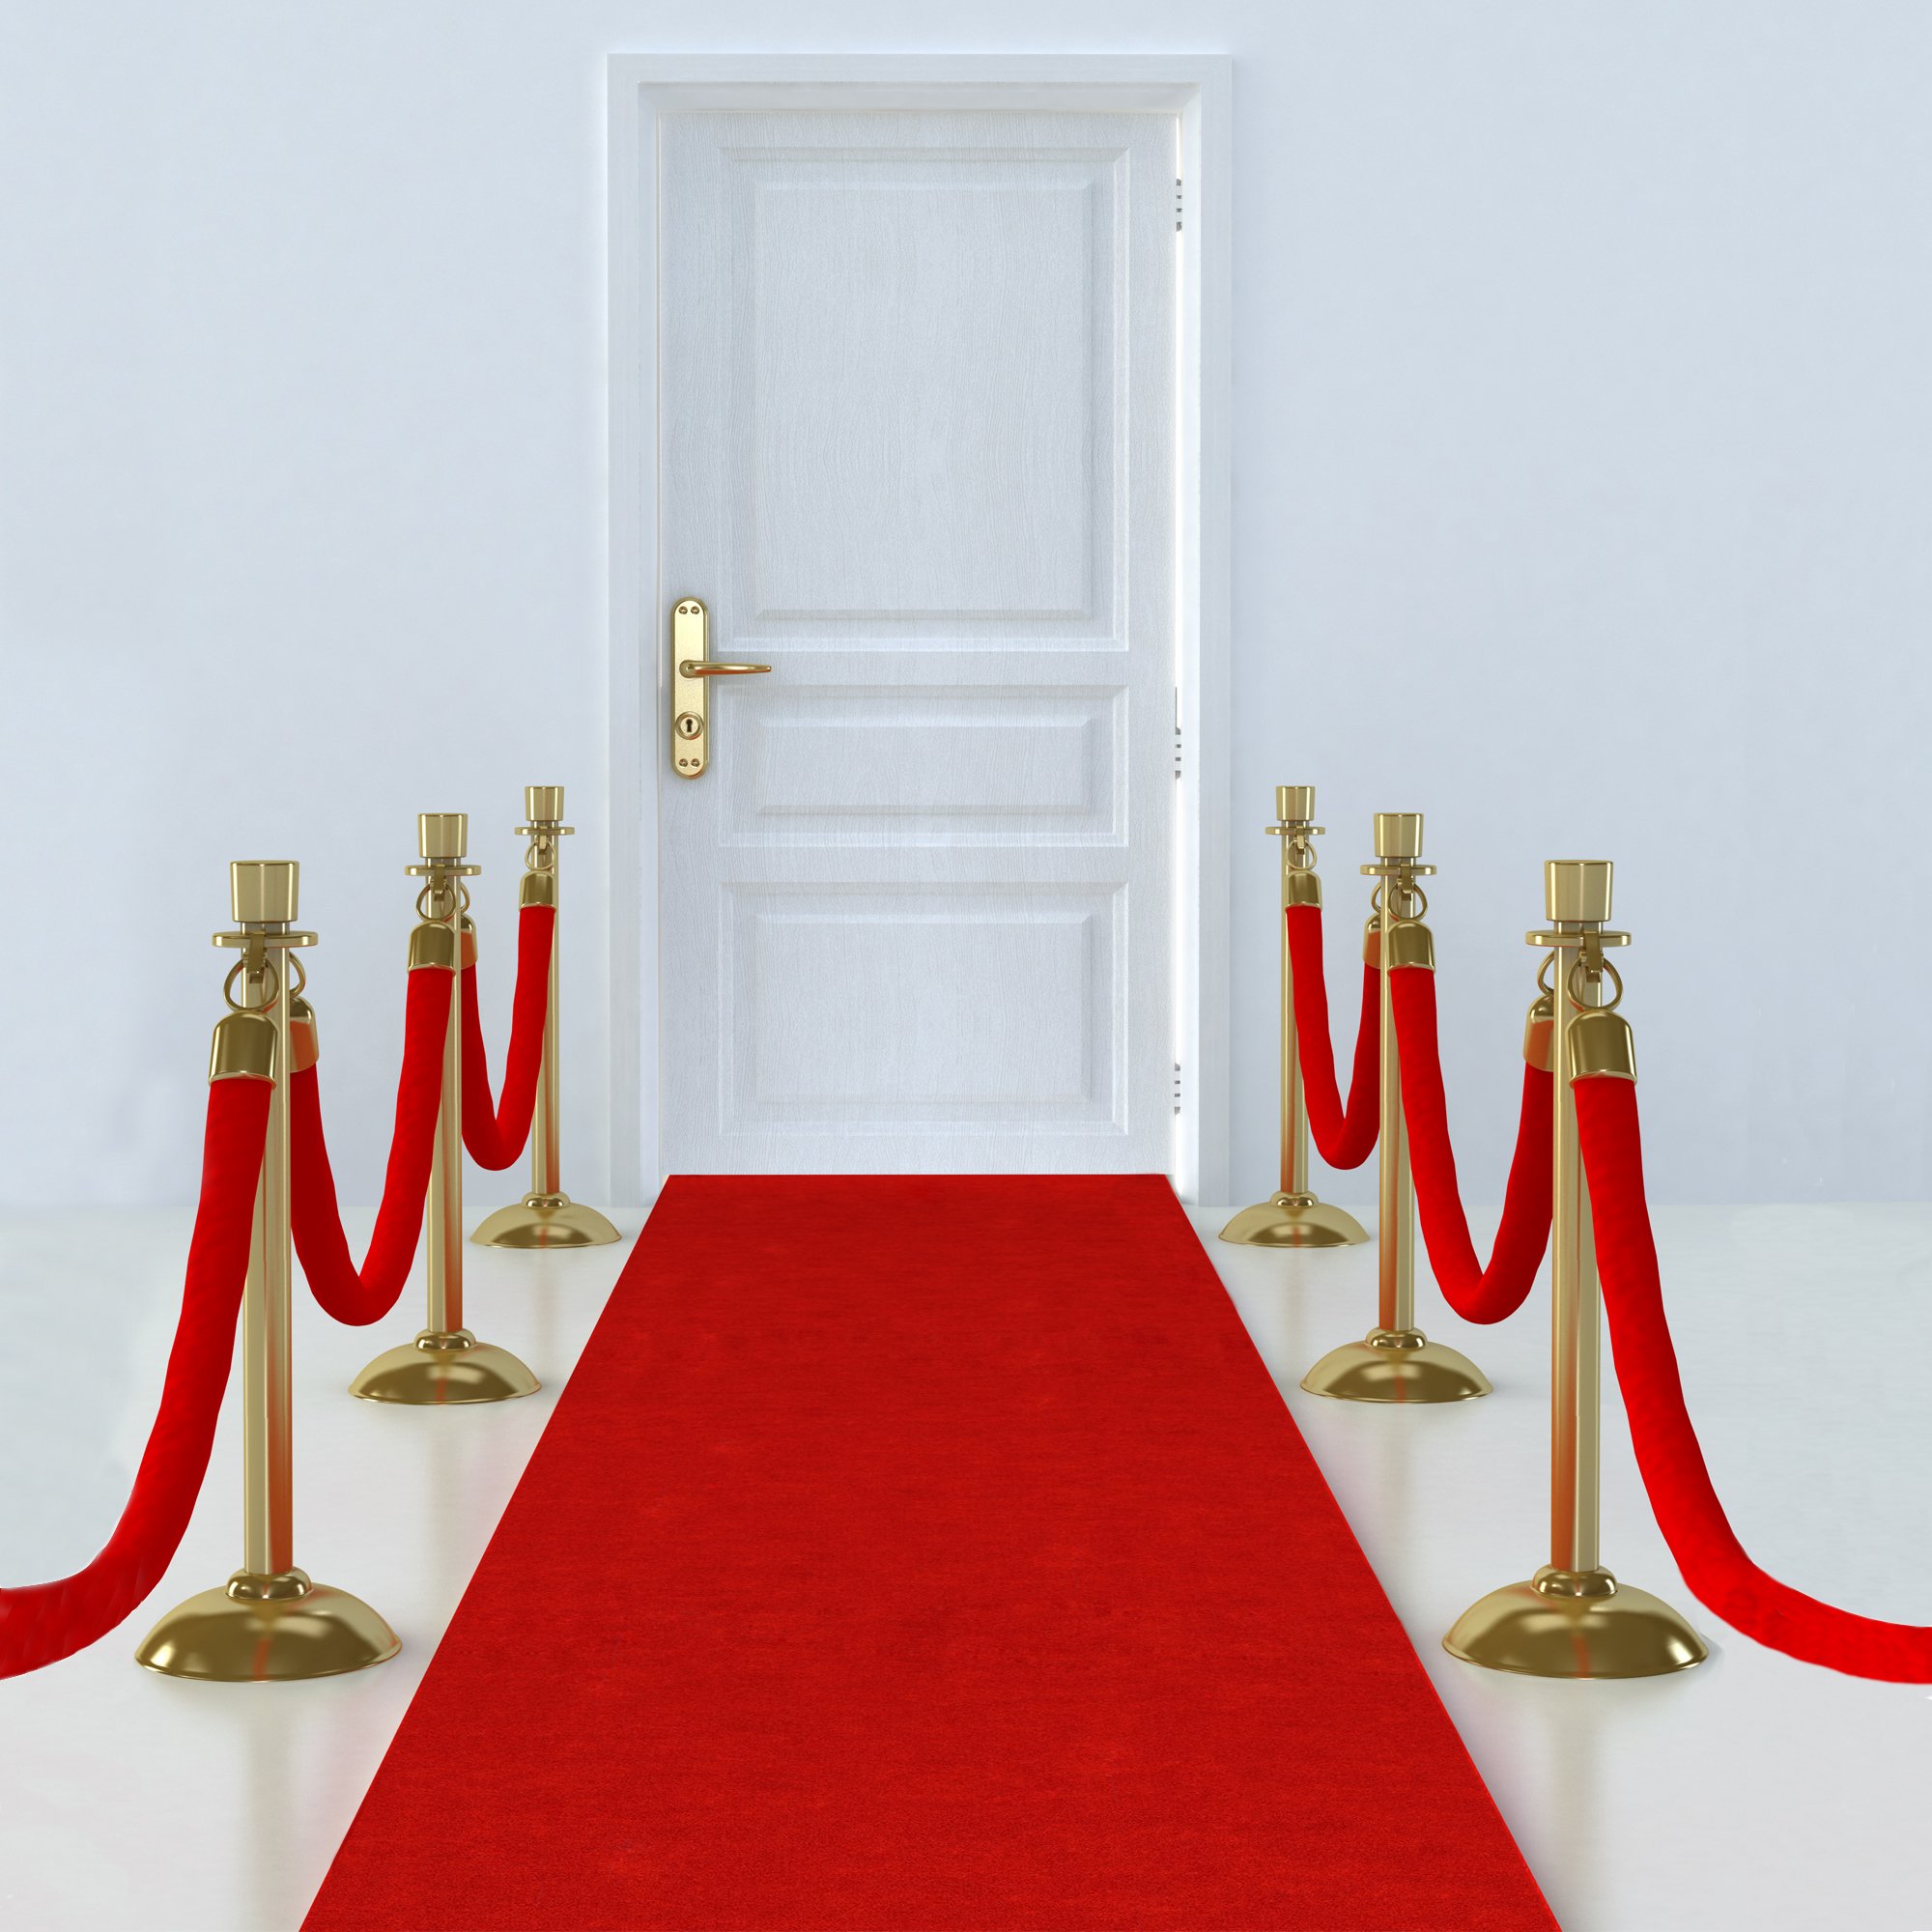 Red, 3x10Ft Happybuy 3Ft X 10Ft Large Red Carpet Runner Rug Solid TRP Rubber Backed Hollywood Runner Carpet Non-Slip Stair Patio Party Decor Wedding 1M X 3M Aisle Floor Runner Rug Various Sizes